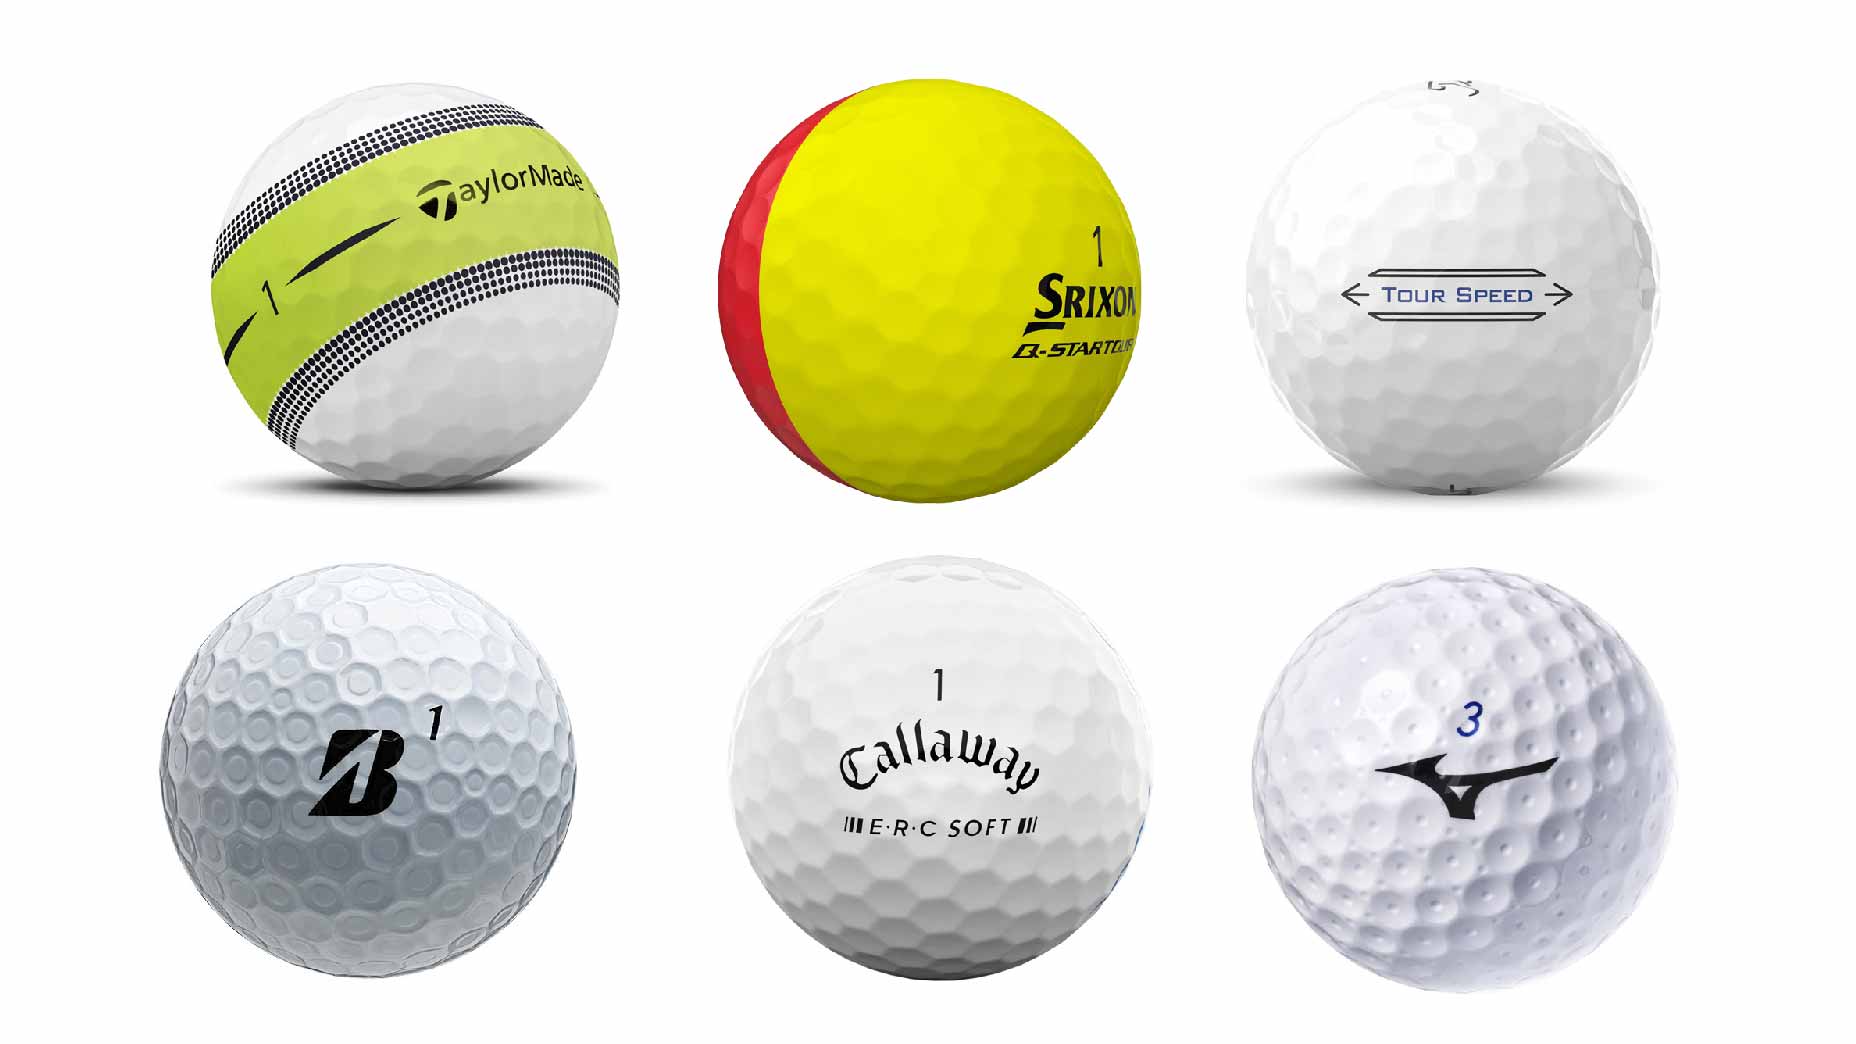 11 premium value golf balls to lower your scores | 2023 Golf Ball Guide